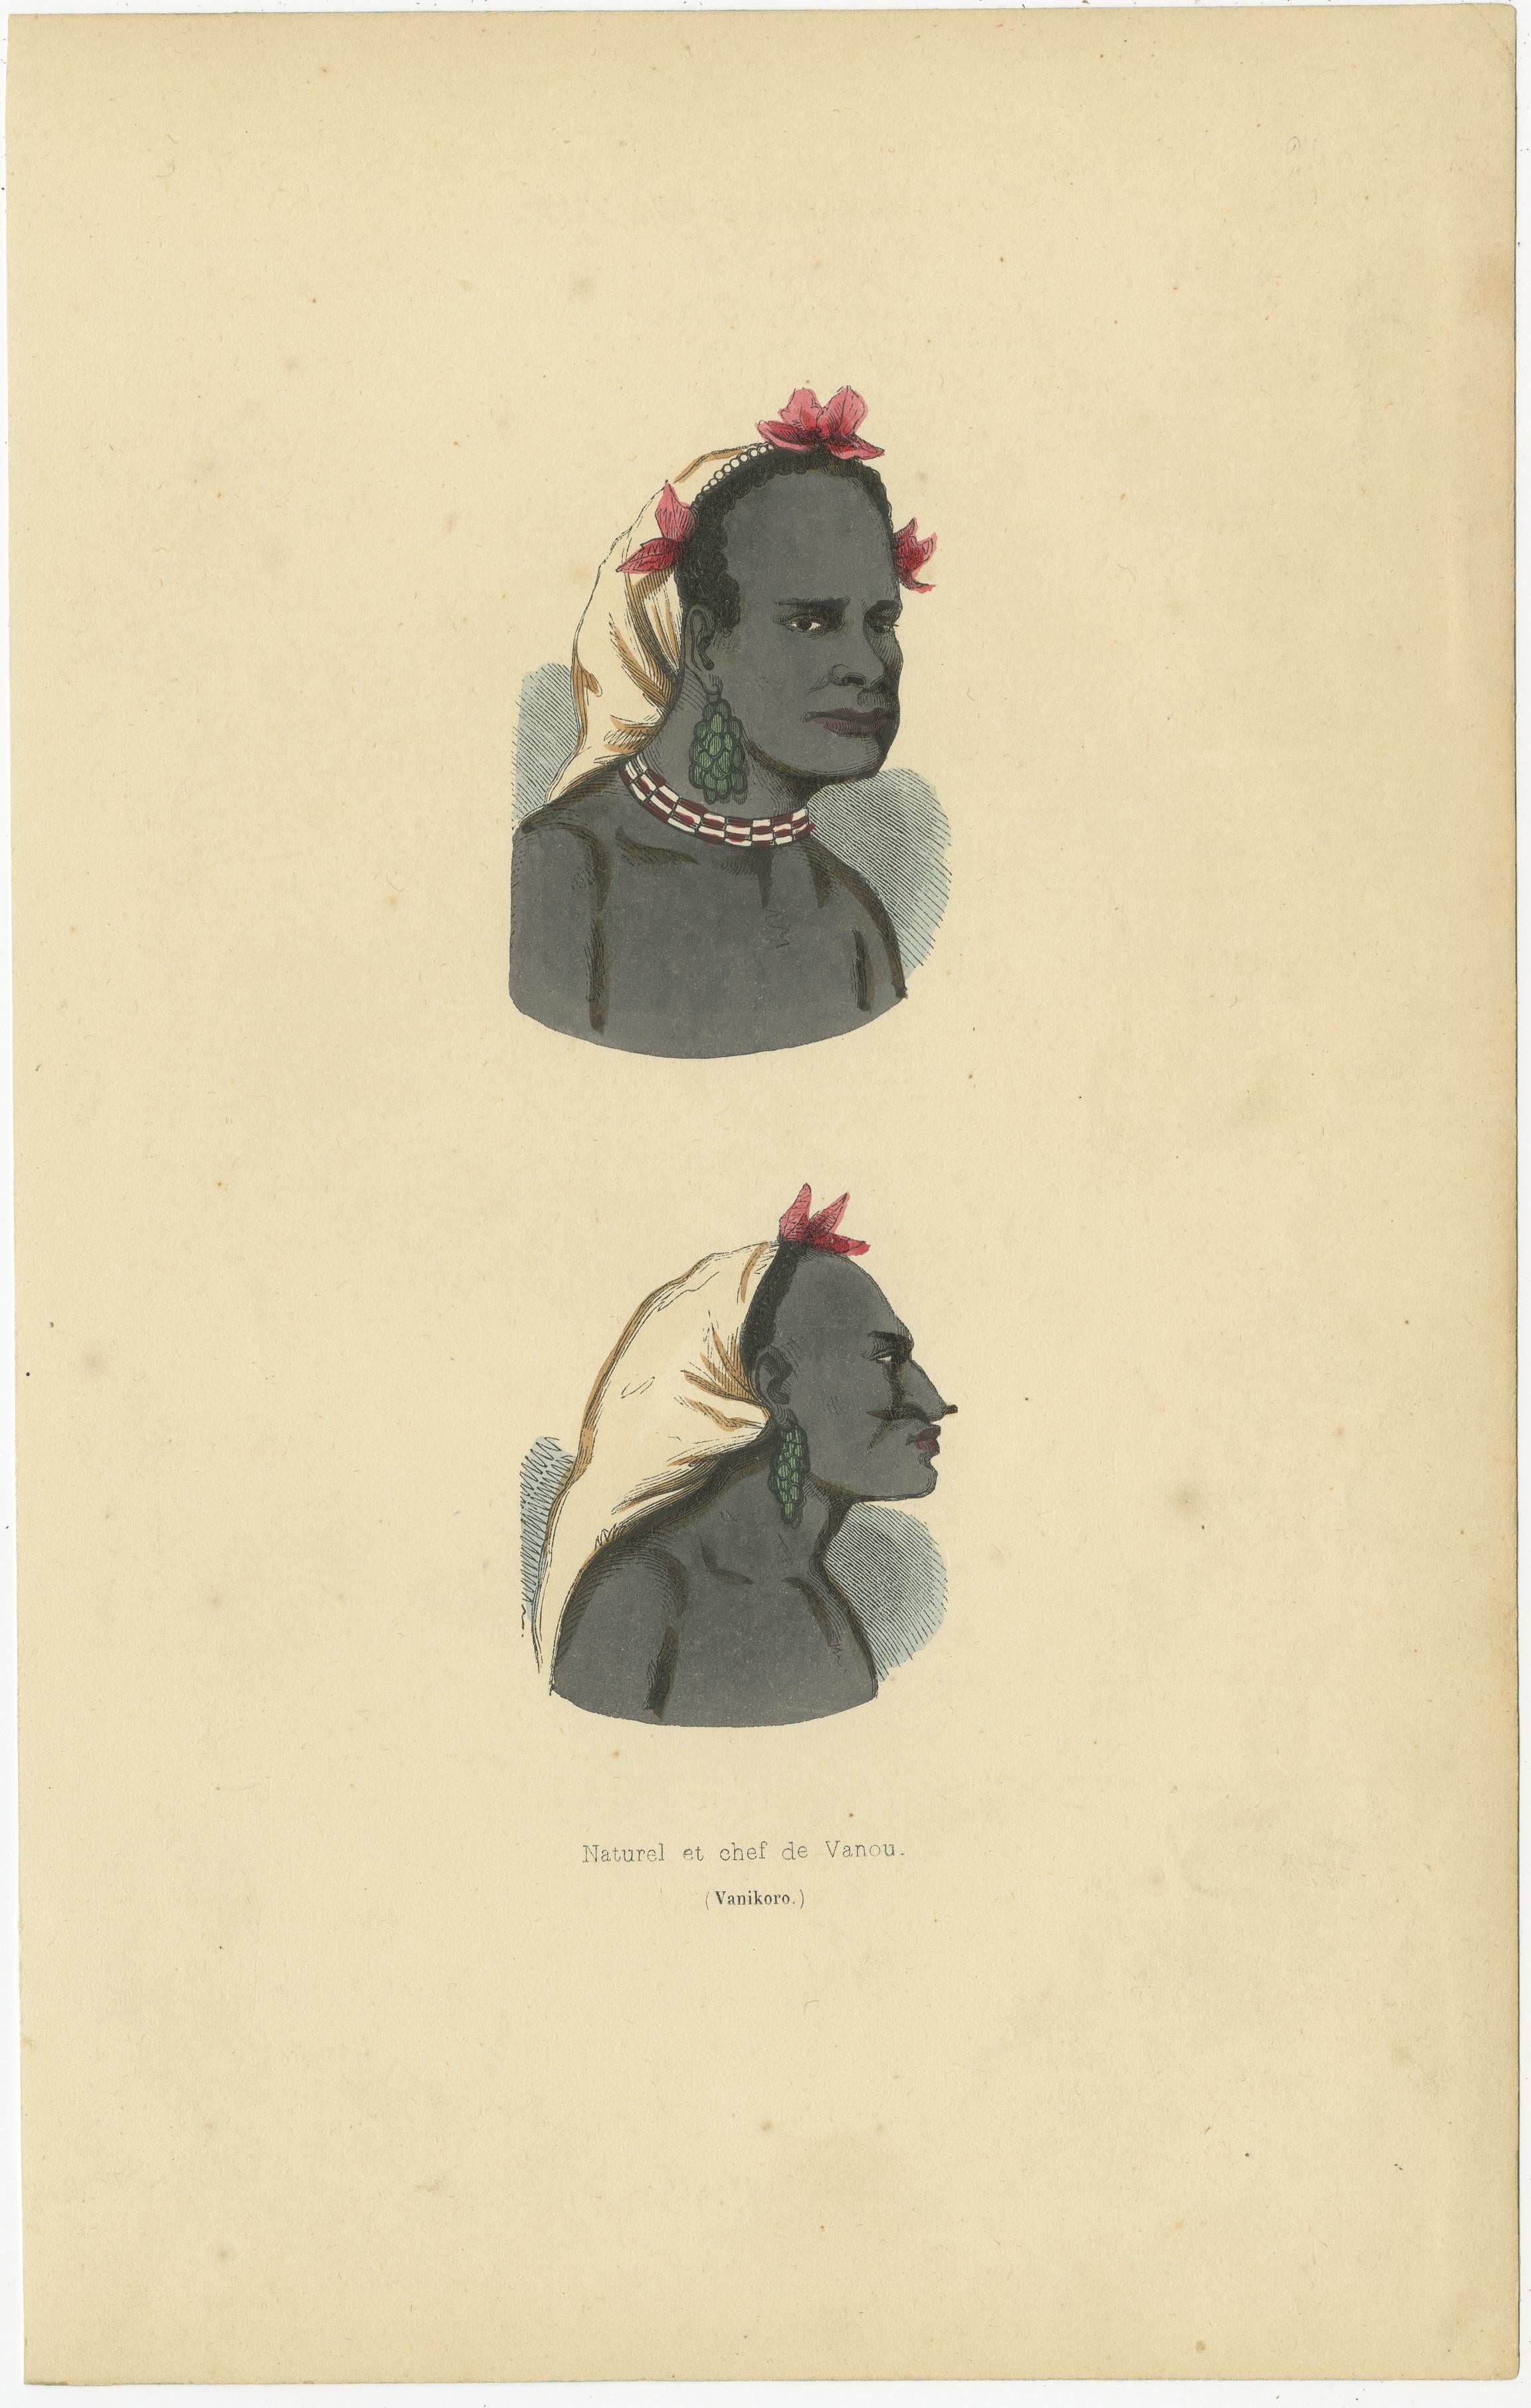 Antique print titled 'Naturel et chef de Vanou (Vanikoro)'. Hand colored woodcut of a Melanesian chief and man of Vanou, Vanikoro, Solomon Islands, Pacific Ocean. The chief wears a bandana, earrings and necklace, the man below with a wooden nose